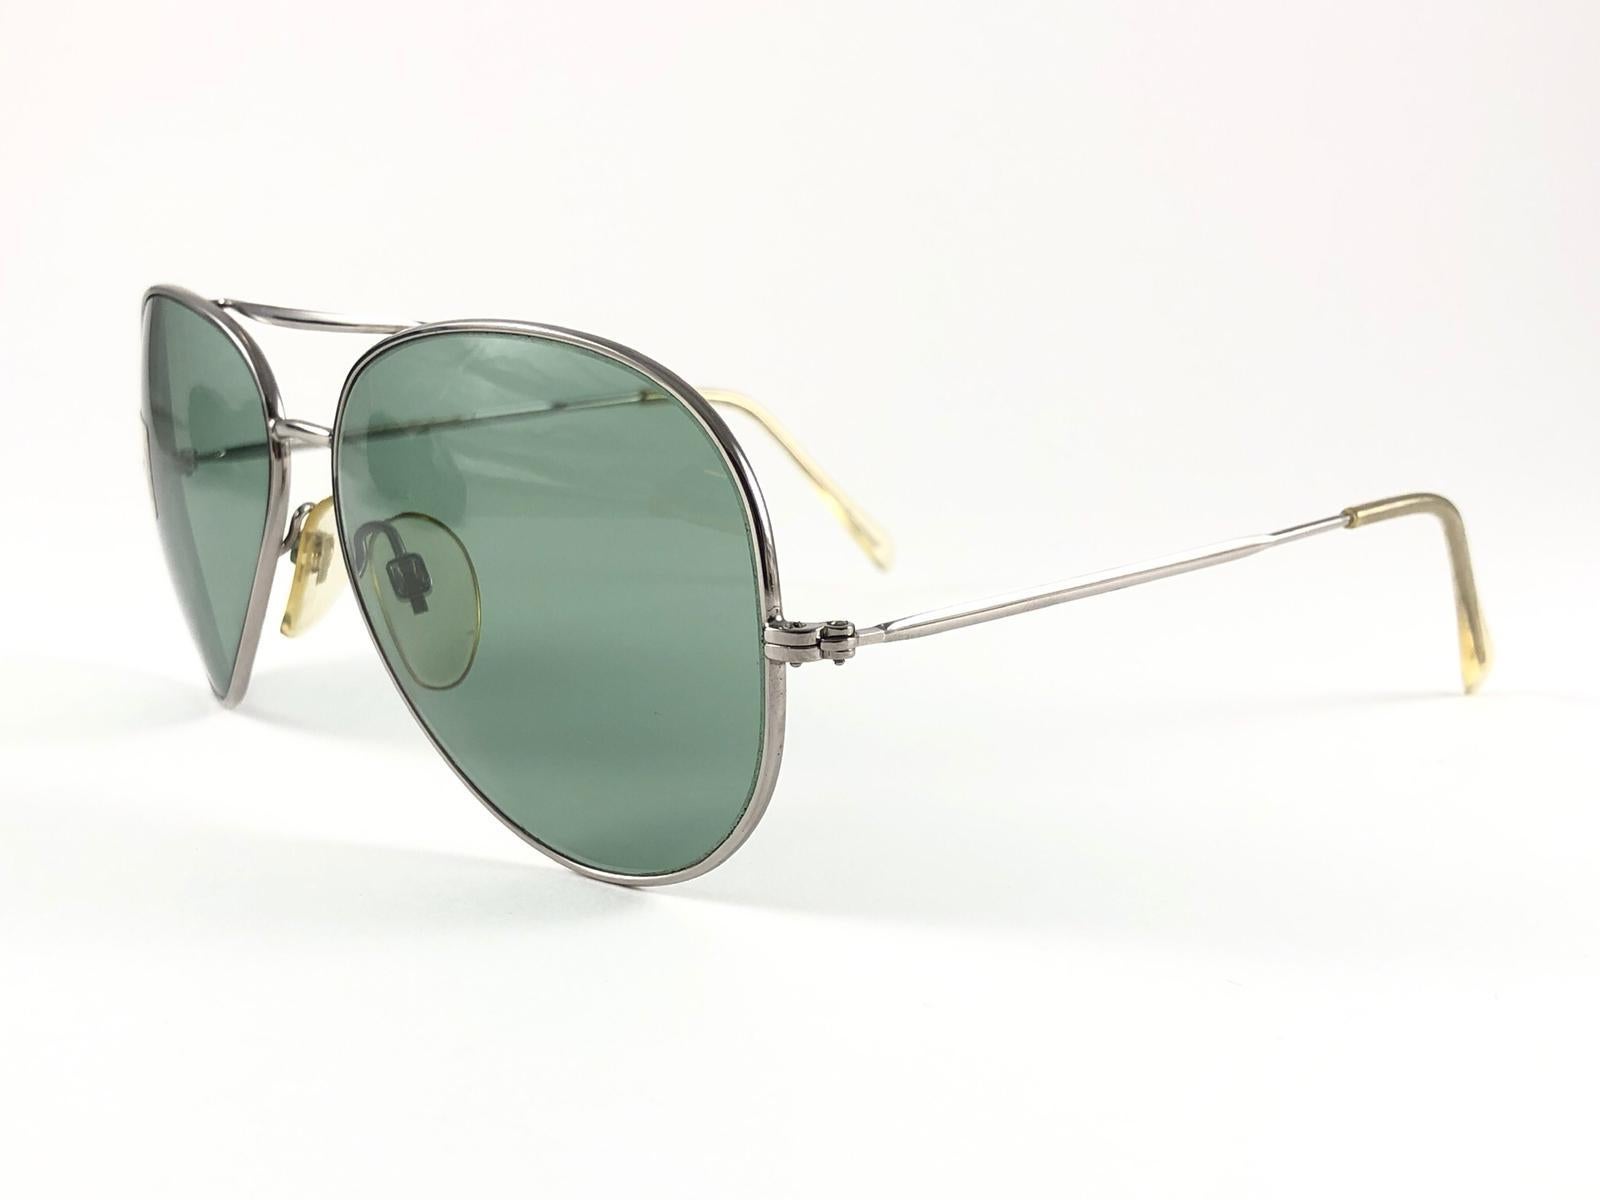 New Vintage Safilo Jet Silver Aviator Frame 1980's Sunglasses Made in Italy For Sale 1